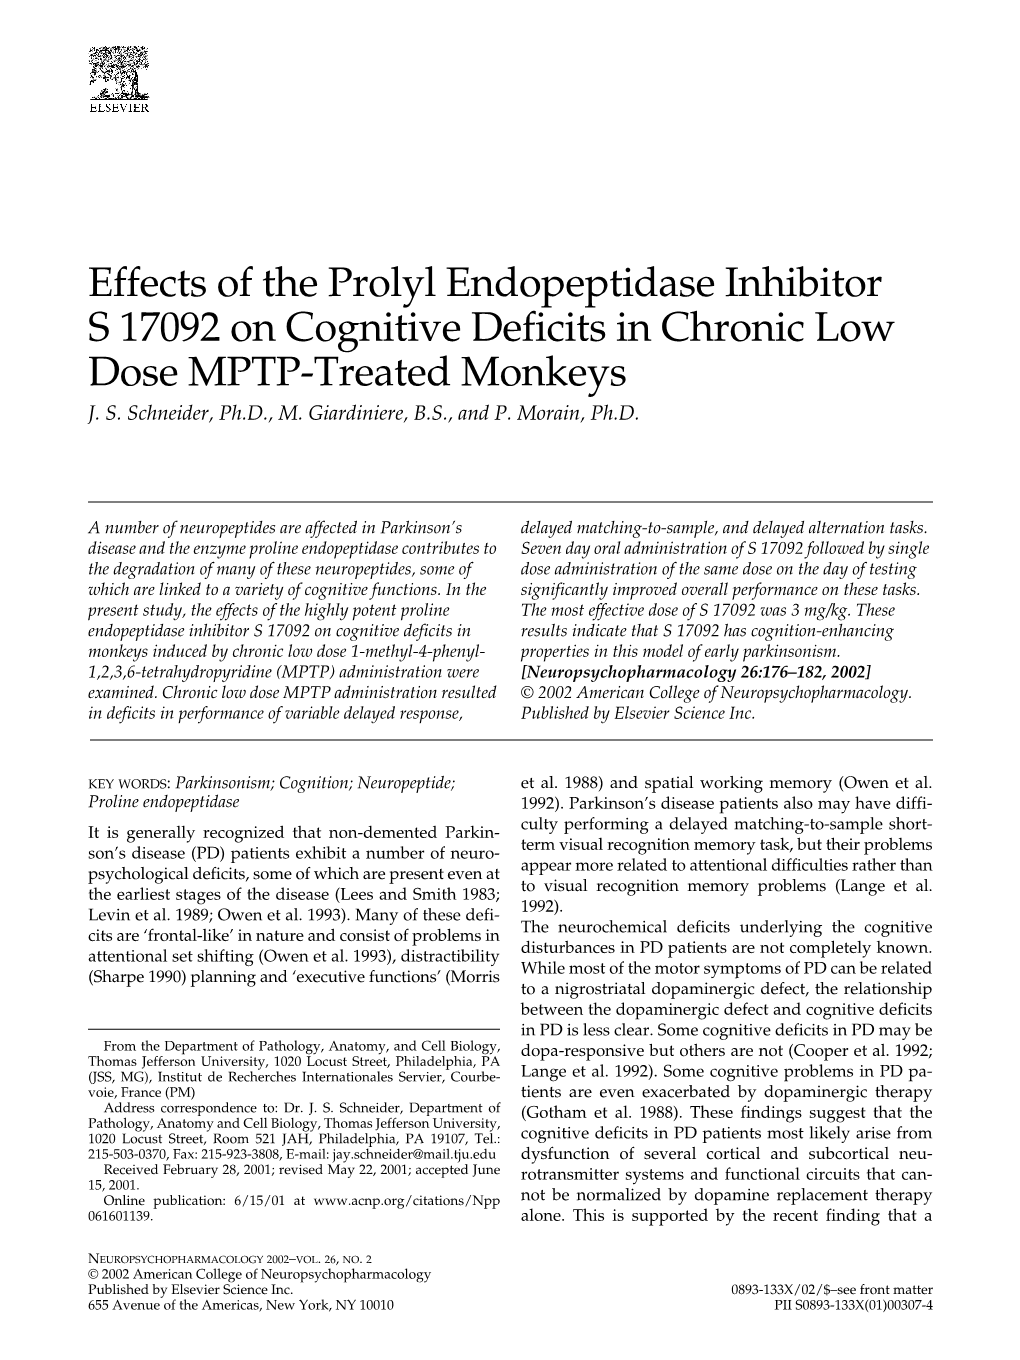 Effects of the Prolyl Endopeptidase Inhibitor S 17092 on Cognitive Deficits in Chronic Low Dose MPTP-Treated Monkeys J